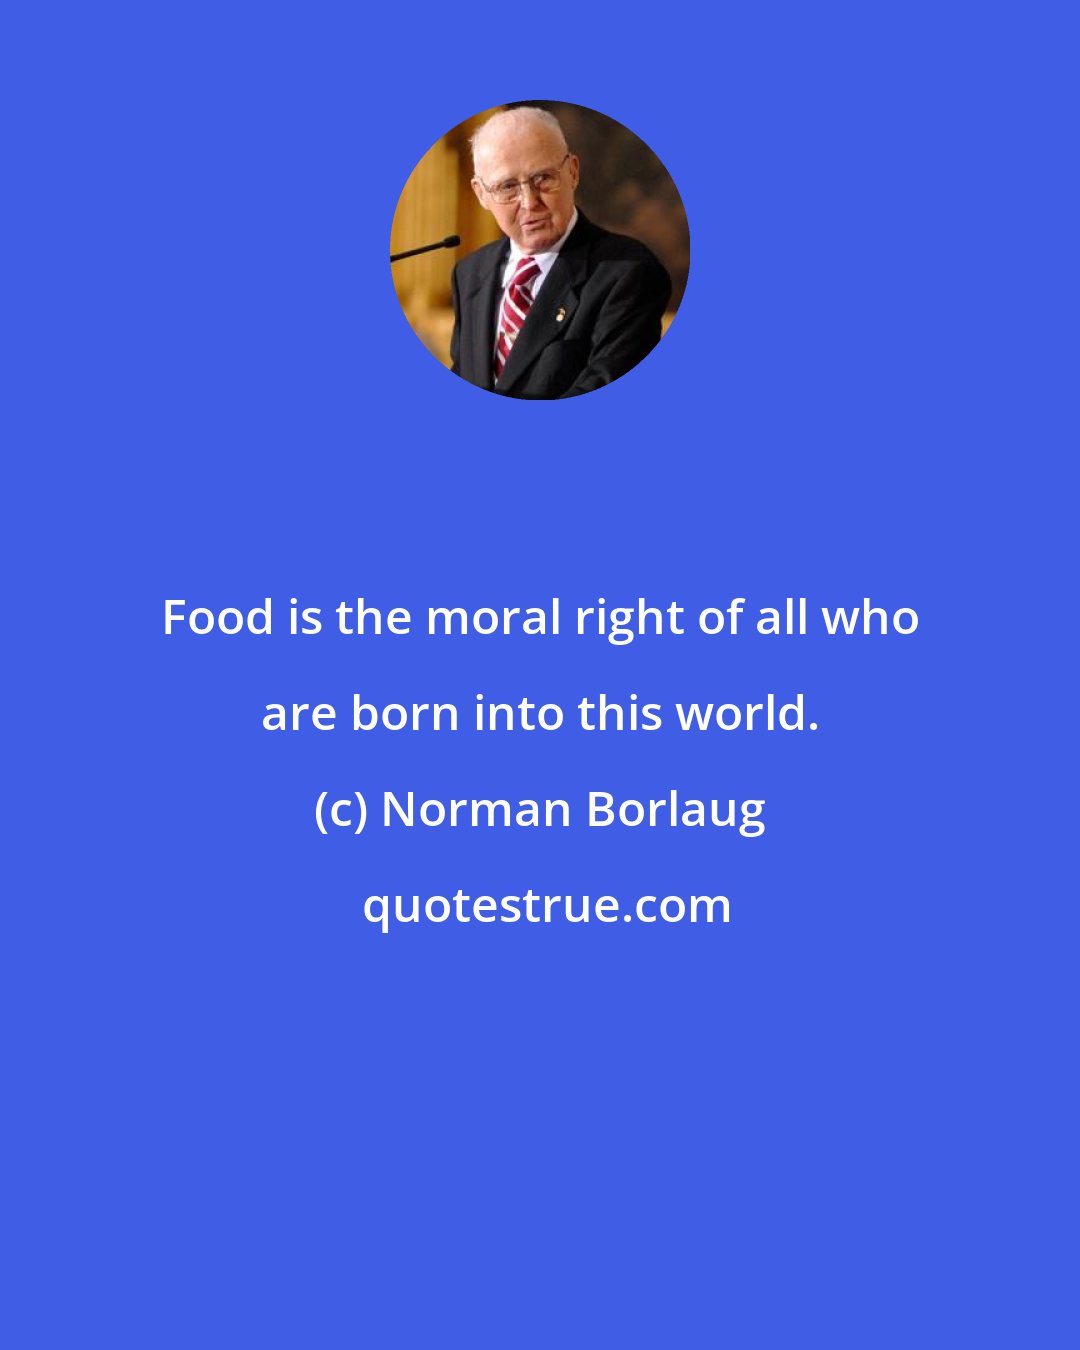 Norman Borlaug: Food is the moral right of all who are born into this world.